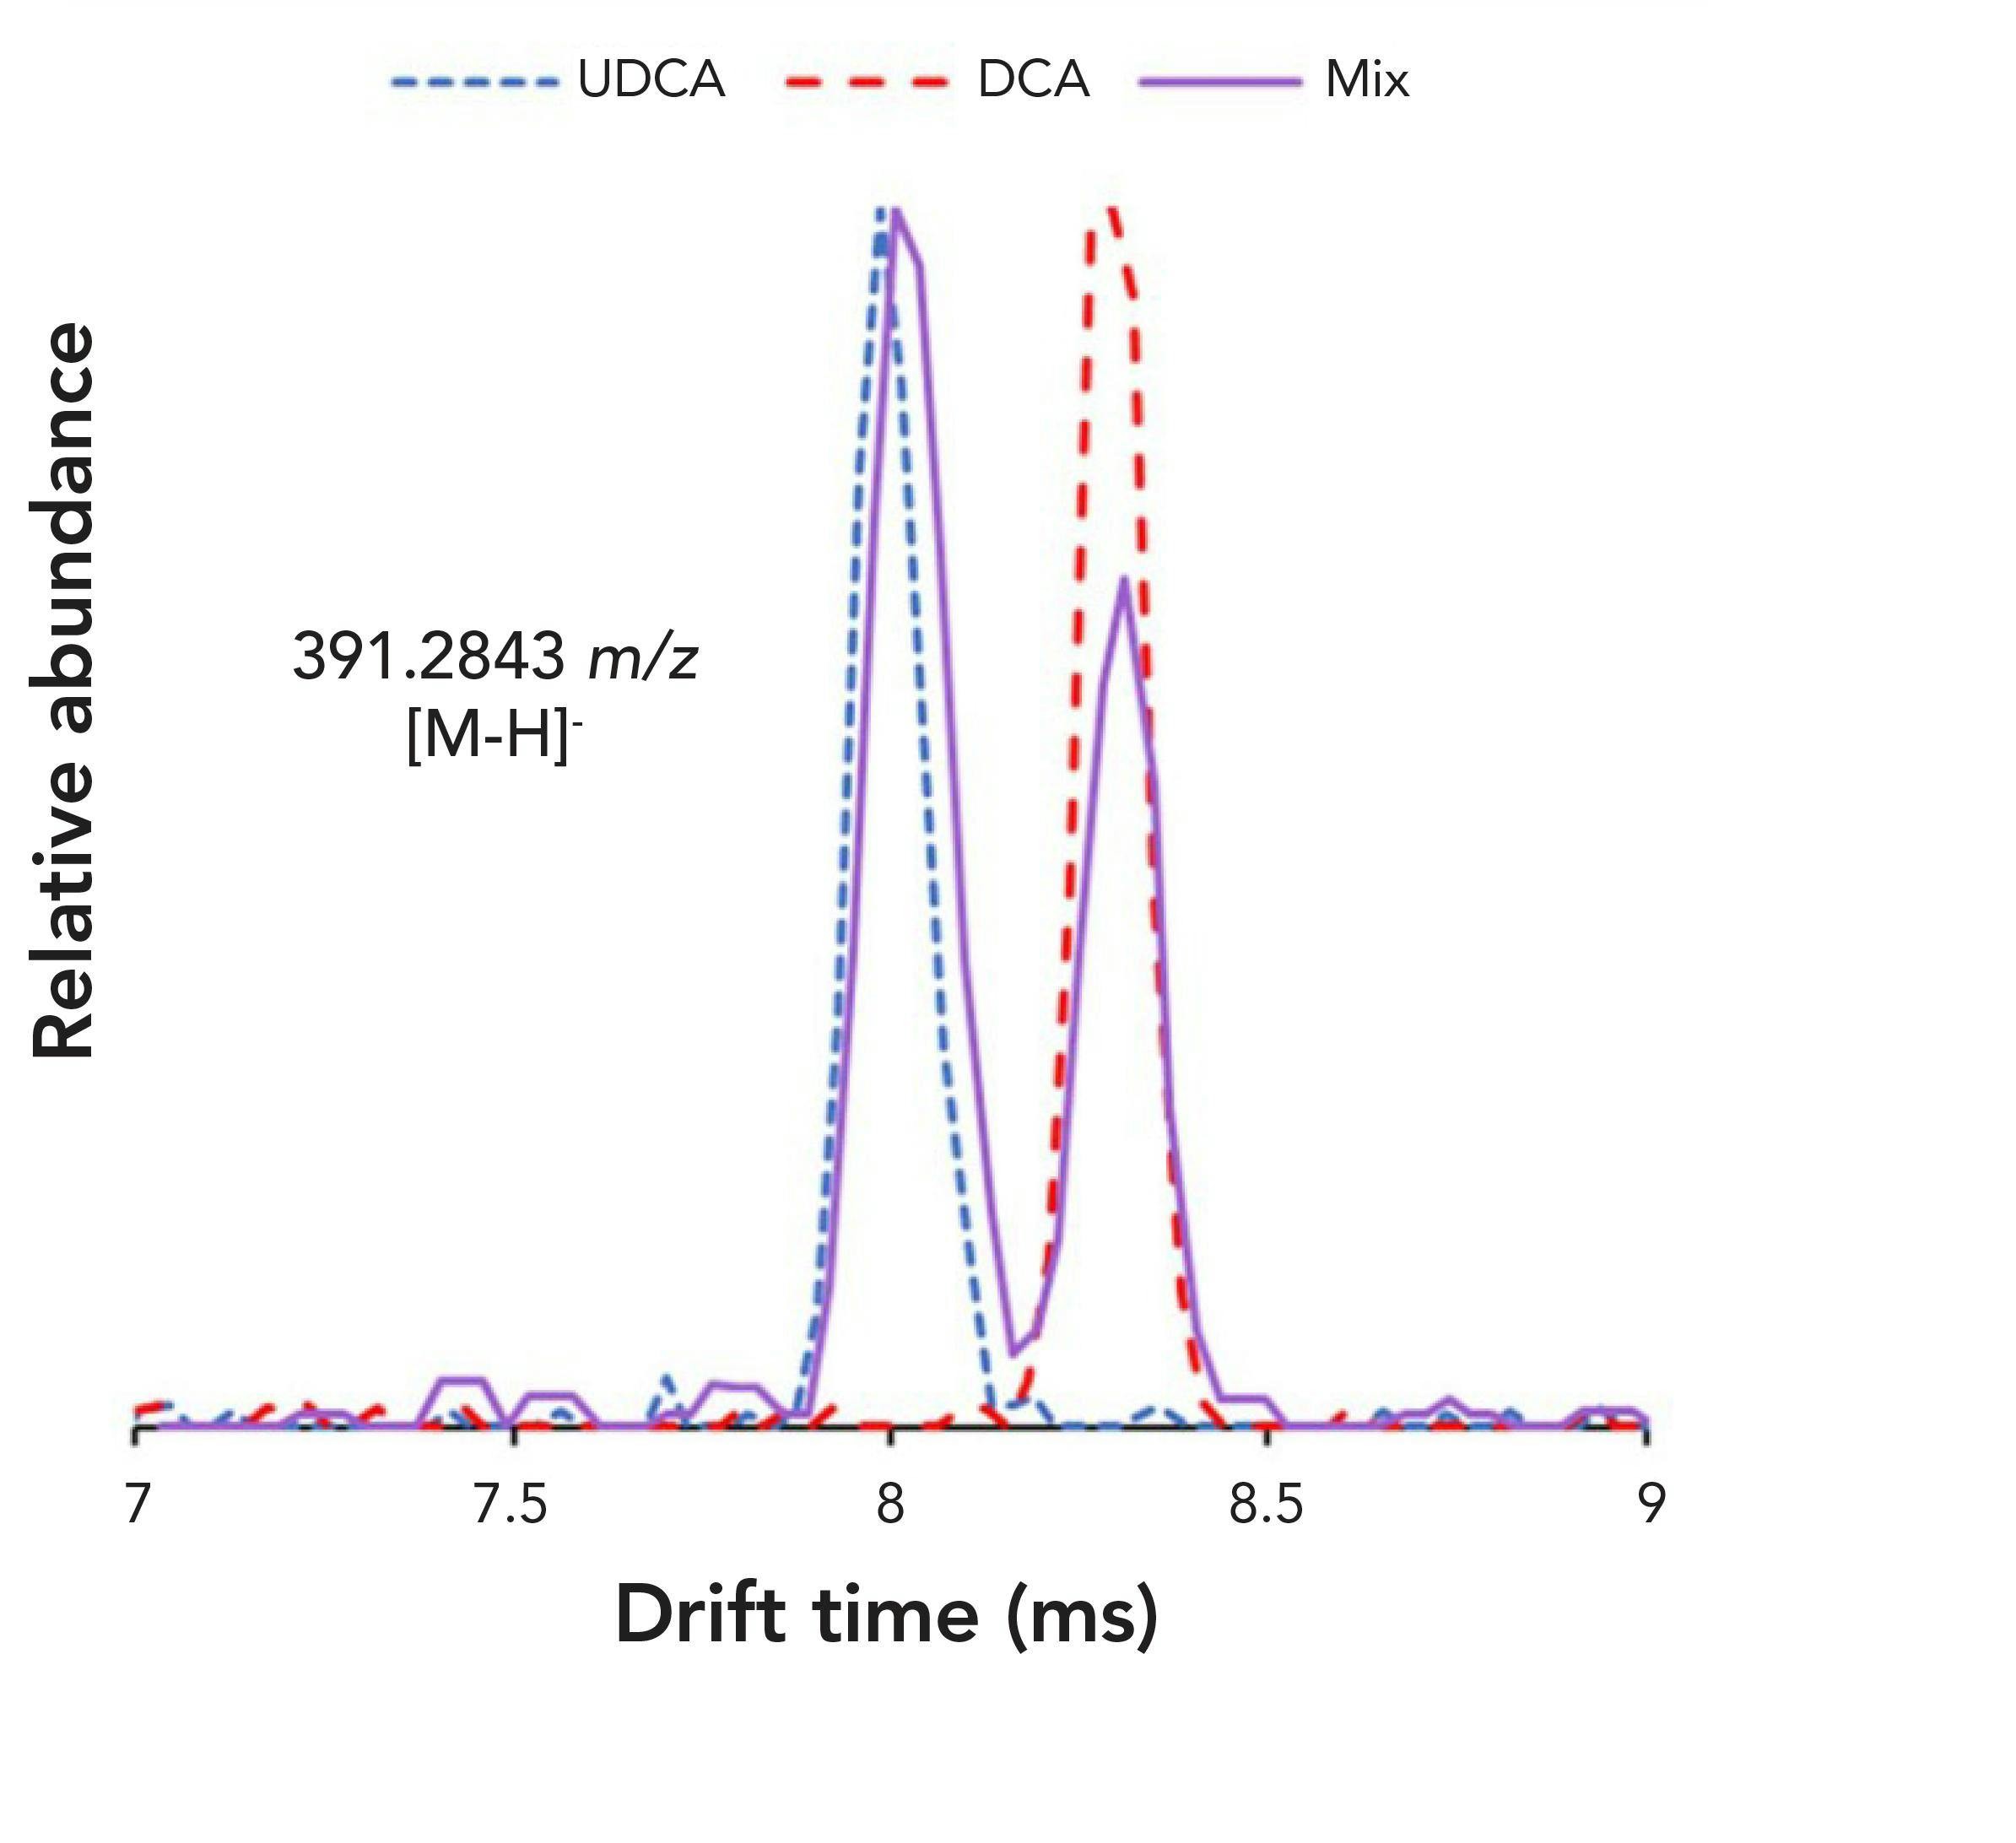 Figure 2: Urso‐deoxycholic acid (UDCA) and deoxycholic acid (DCA) illustrating the separation of two bile acid isomers (391.2843 m/z), using 100% air as drift gas (individual standards and 50:50 mixture shown).